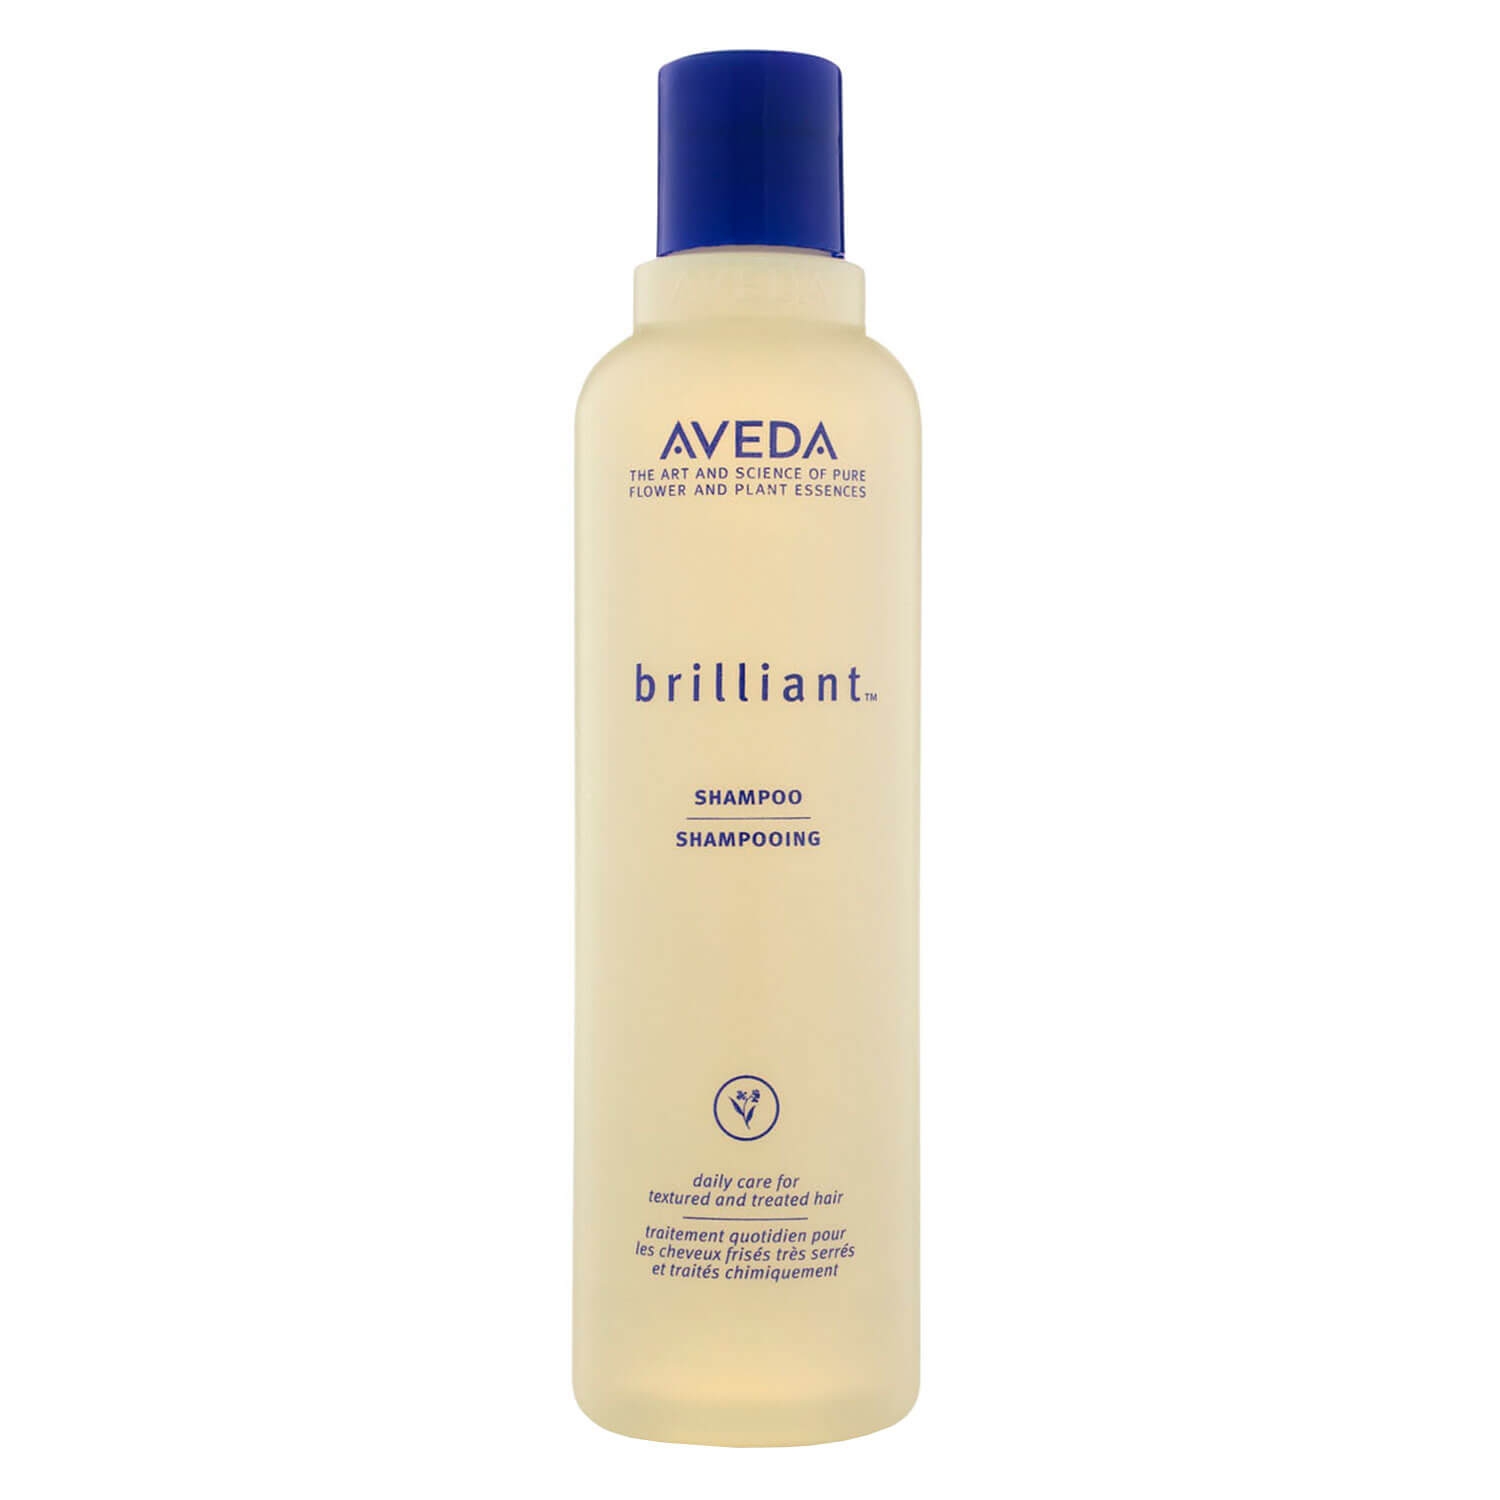 Product image from brilliant - shampoo